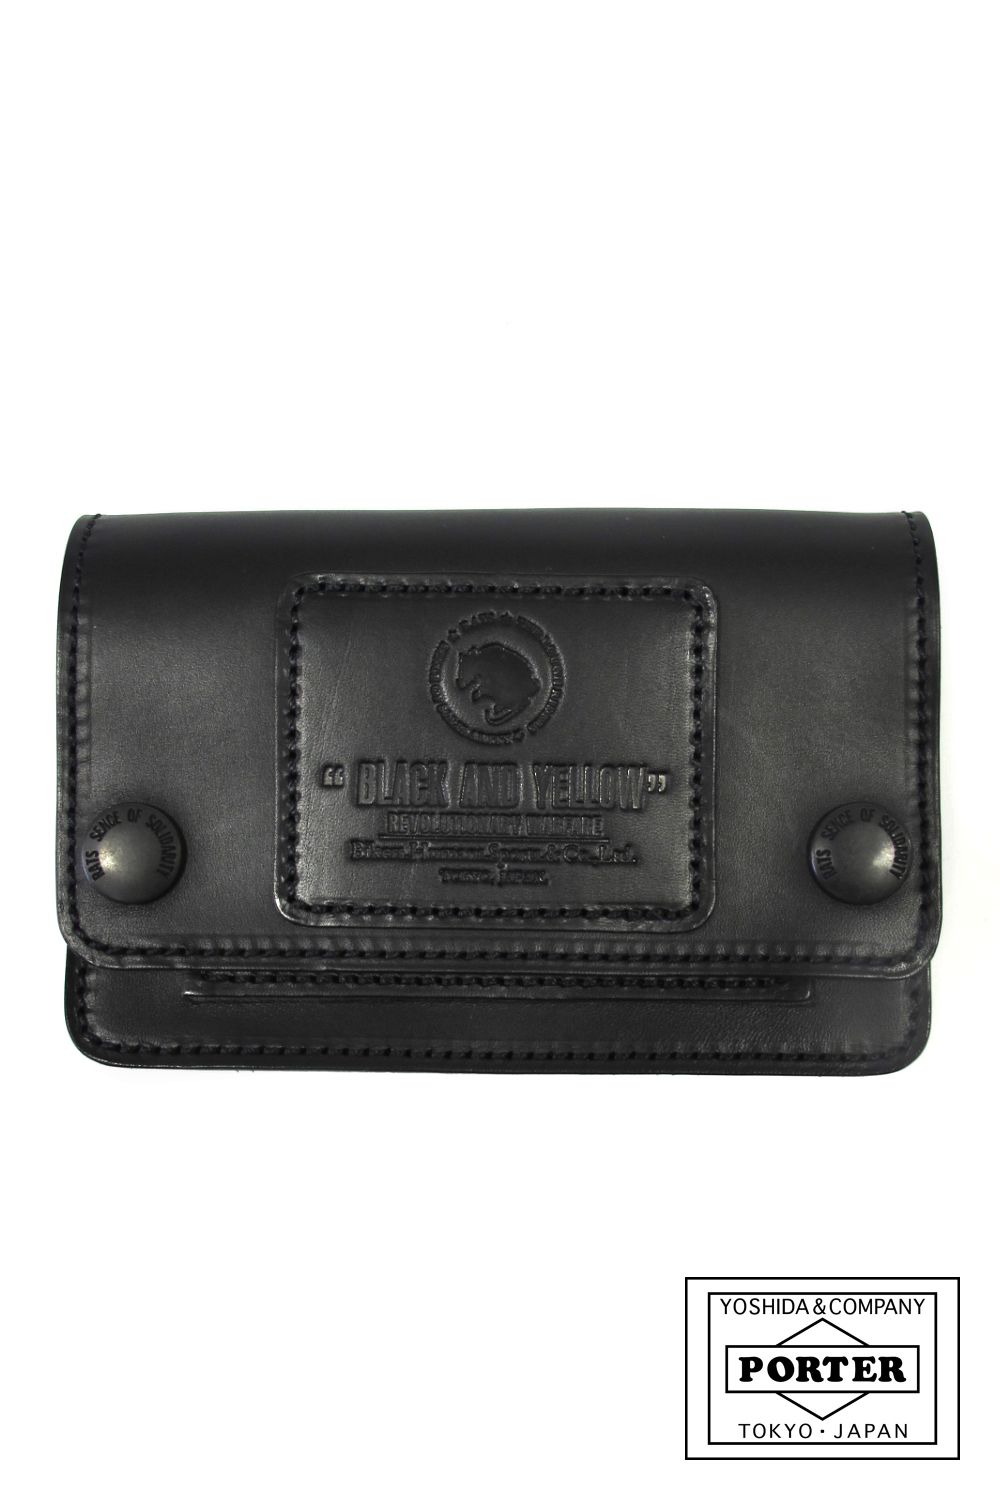 RATS - SHORT LEATHER WALLET (BLACK) / ポーター コラボレザー 